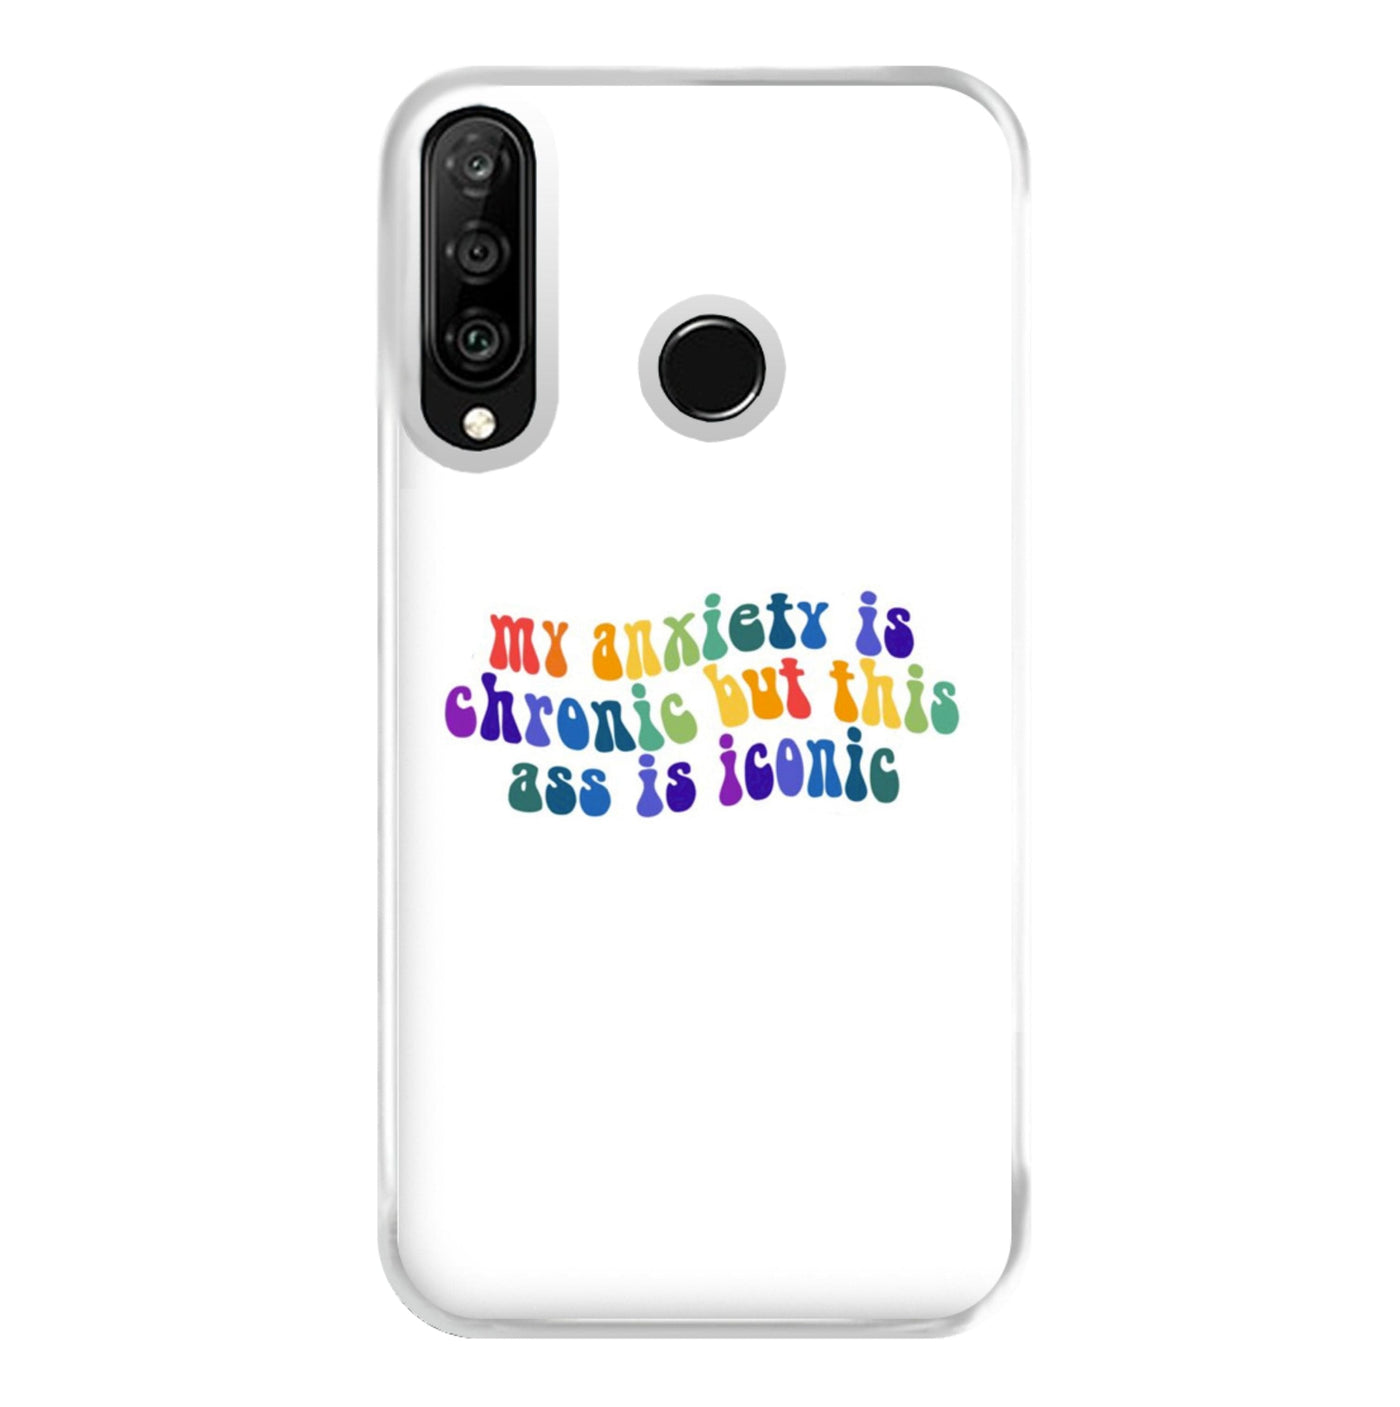 My Anxiety Is Chronic But This Ass Is Iconic - TikTok Phone Case